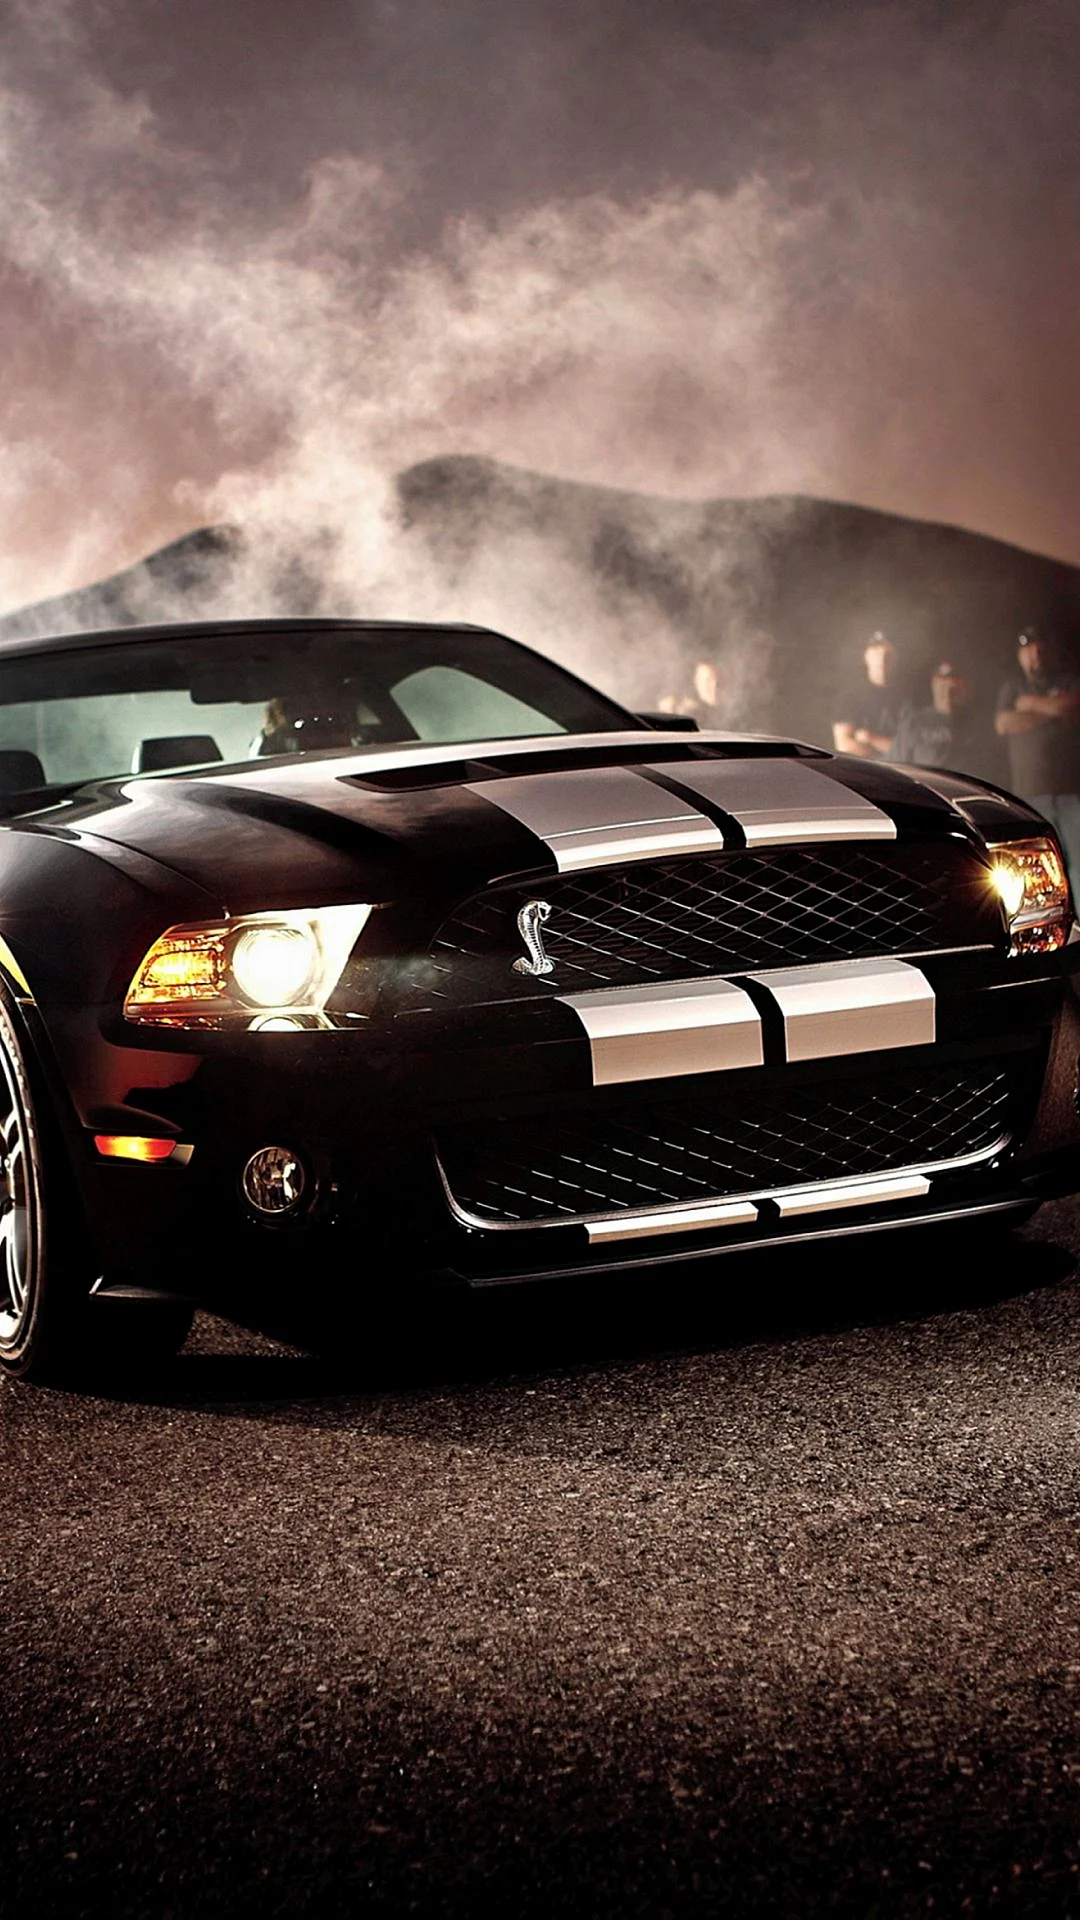 Ford Mustang Shelby Wallpaper For iPhone